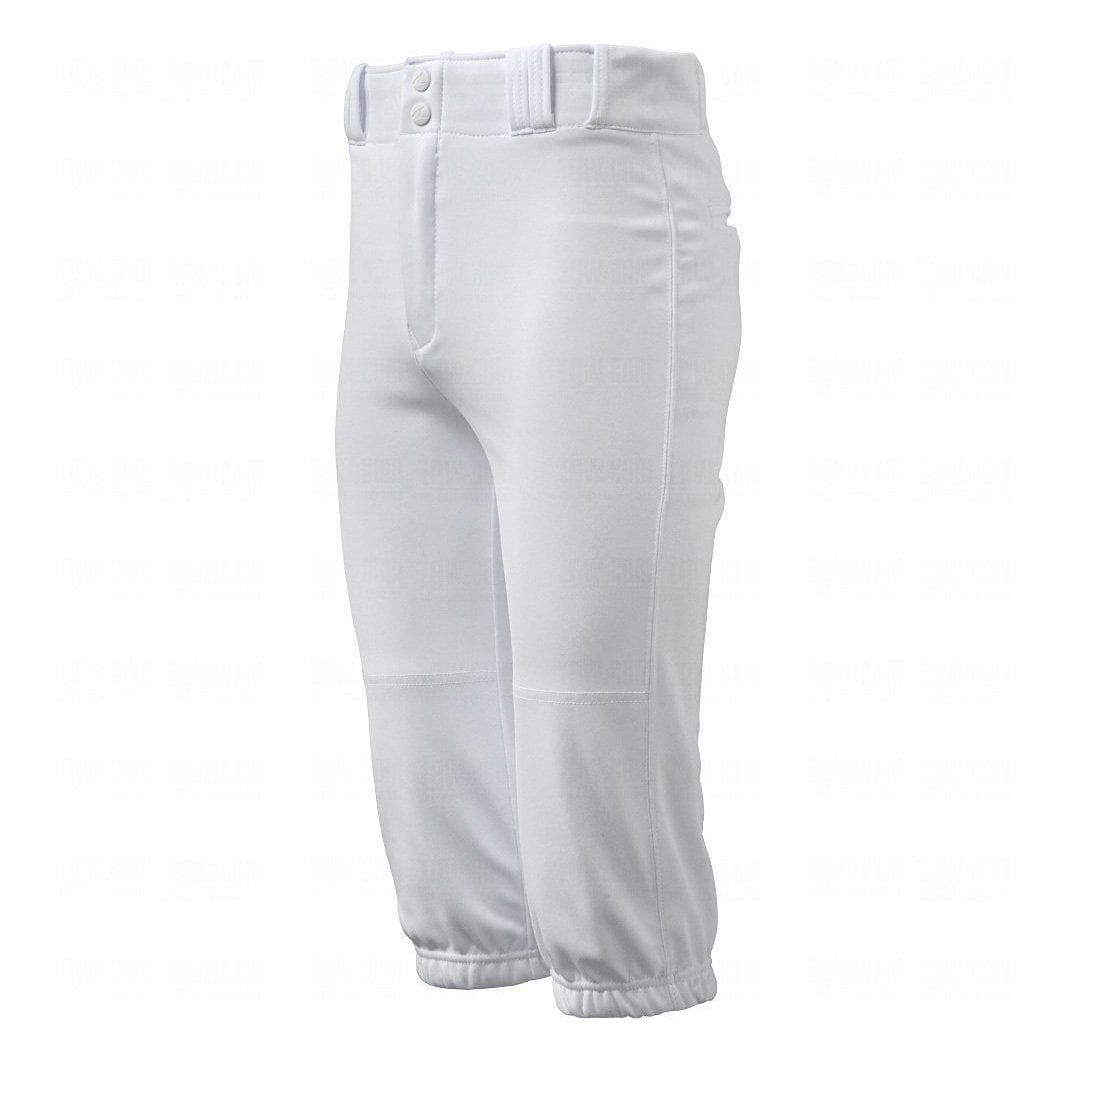 Champro Youth Triple Crown Piped Knicker Pant White|navy L for sale online 